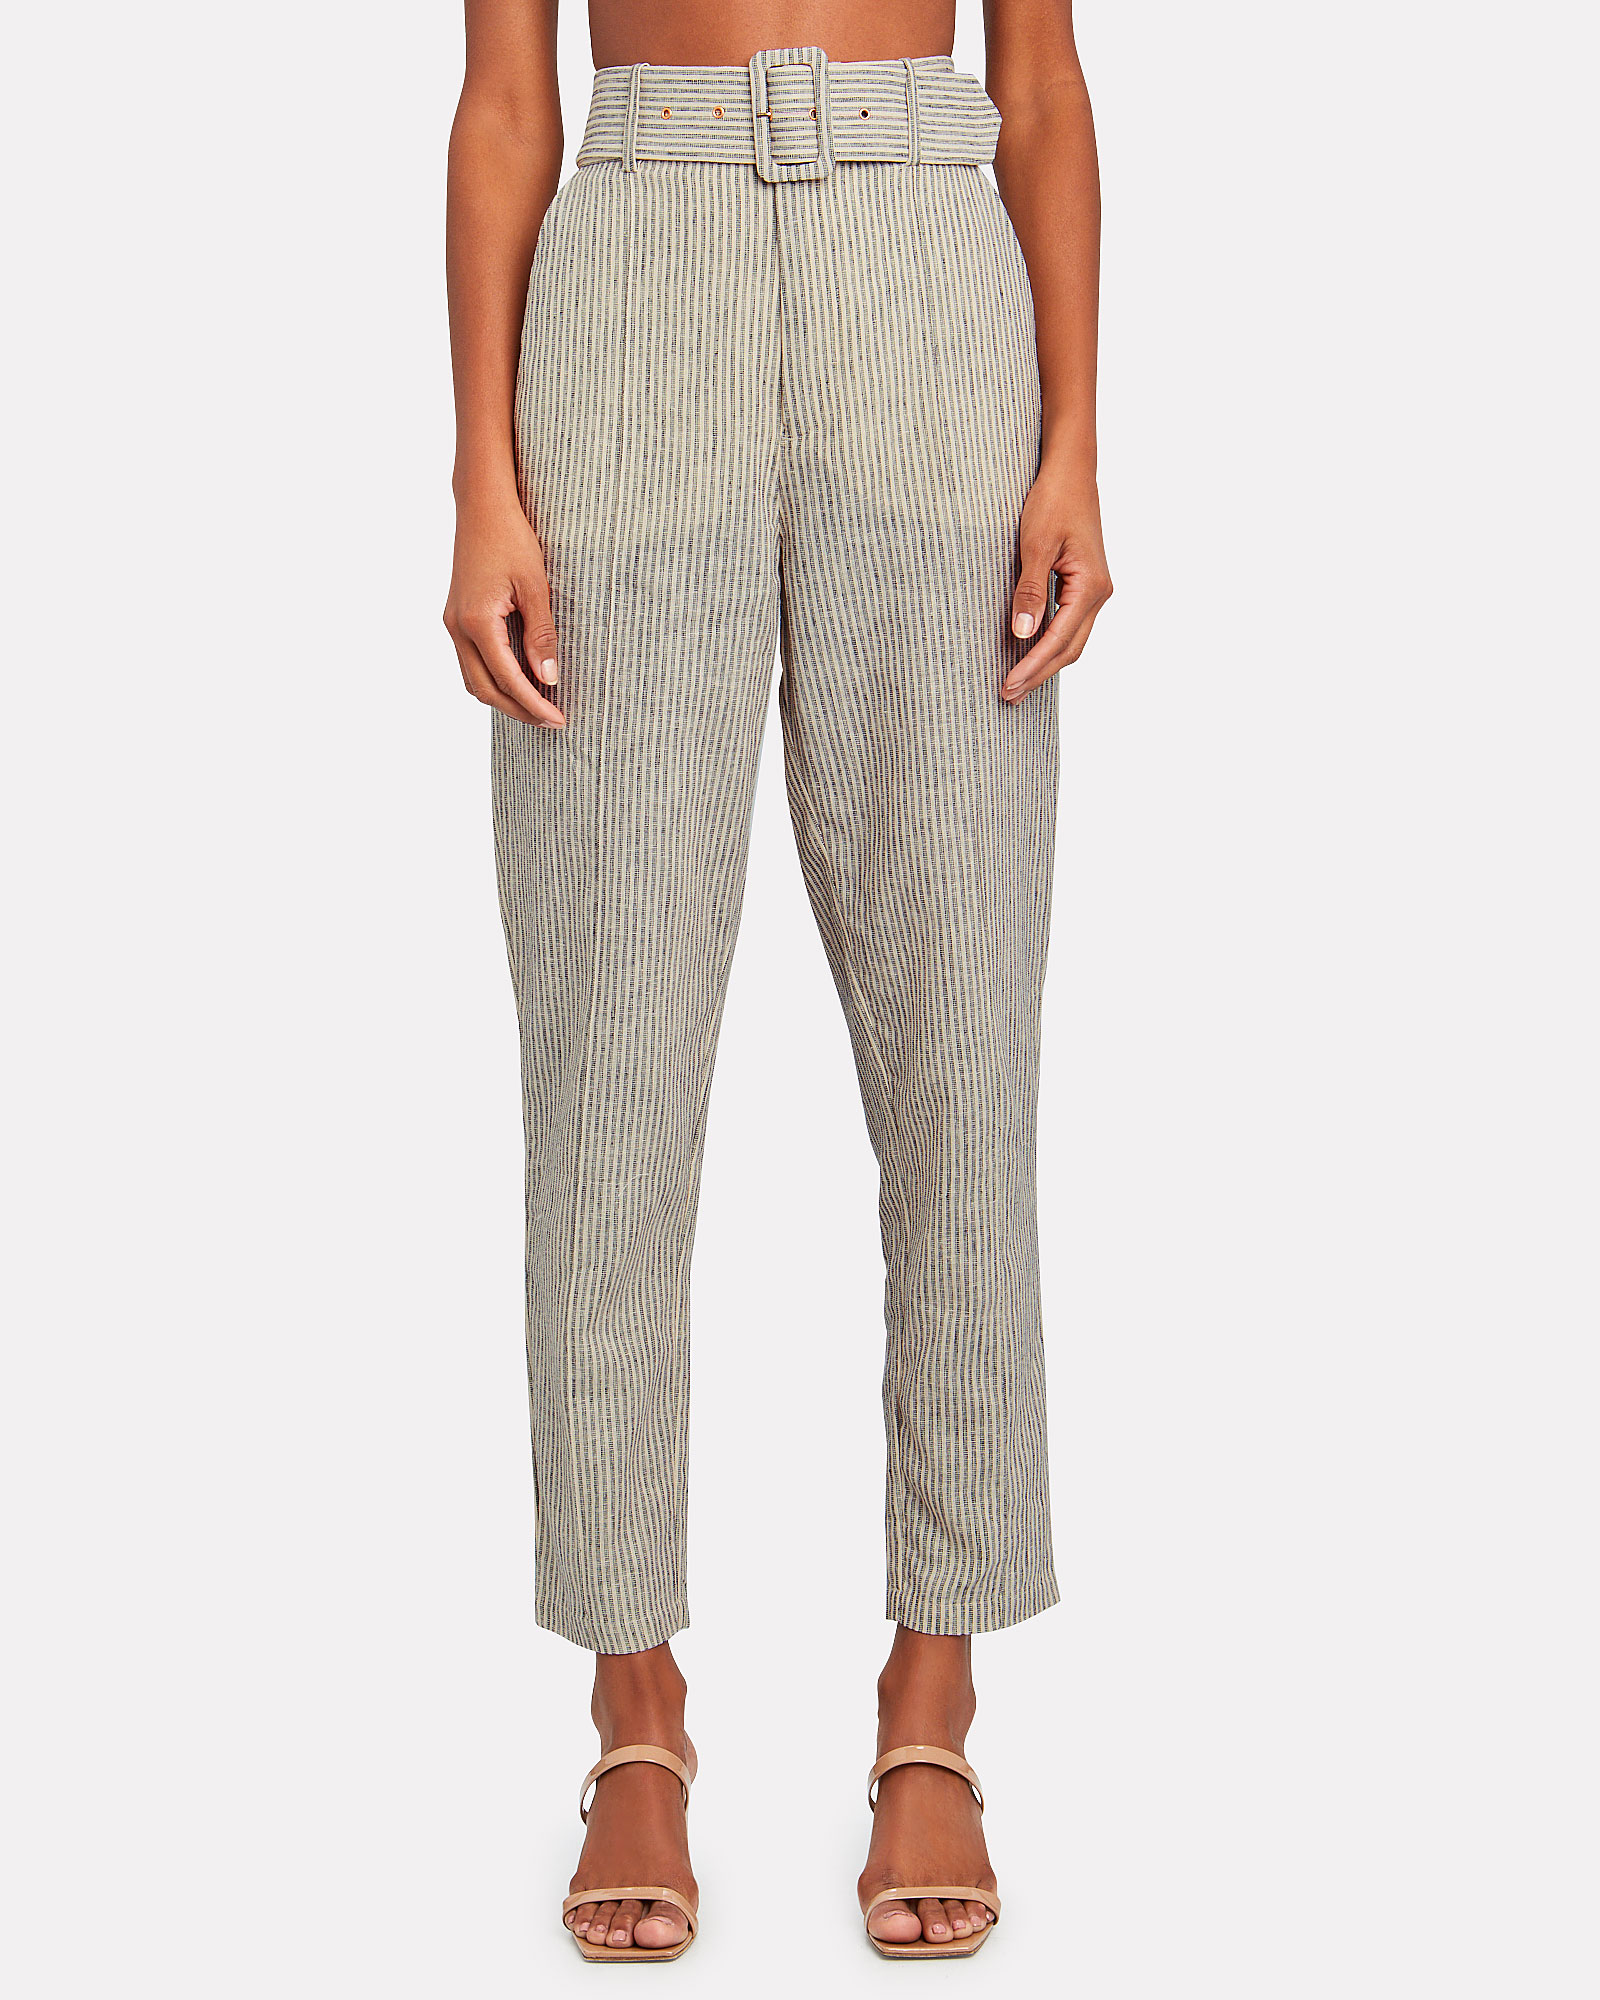 Significant Other | Rockpool High-Rise Linen Pants | INTERMIX®